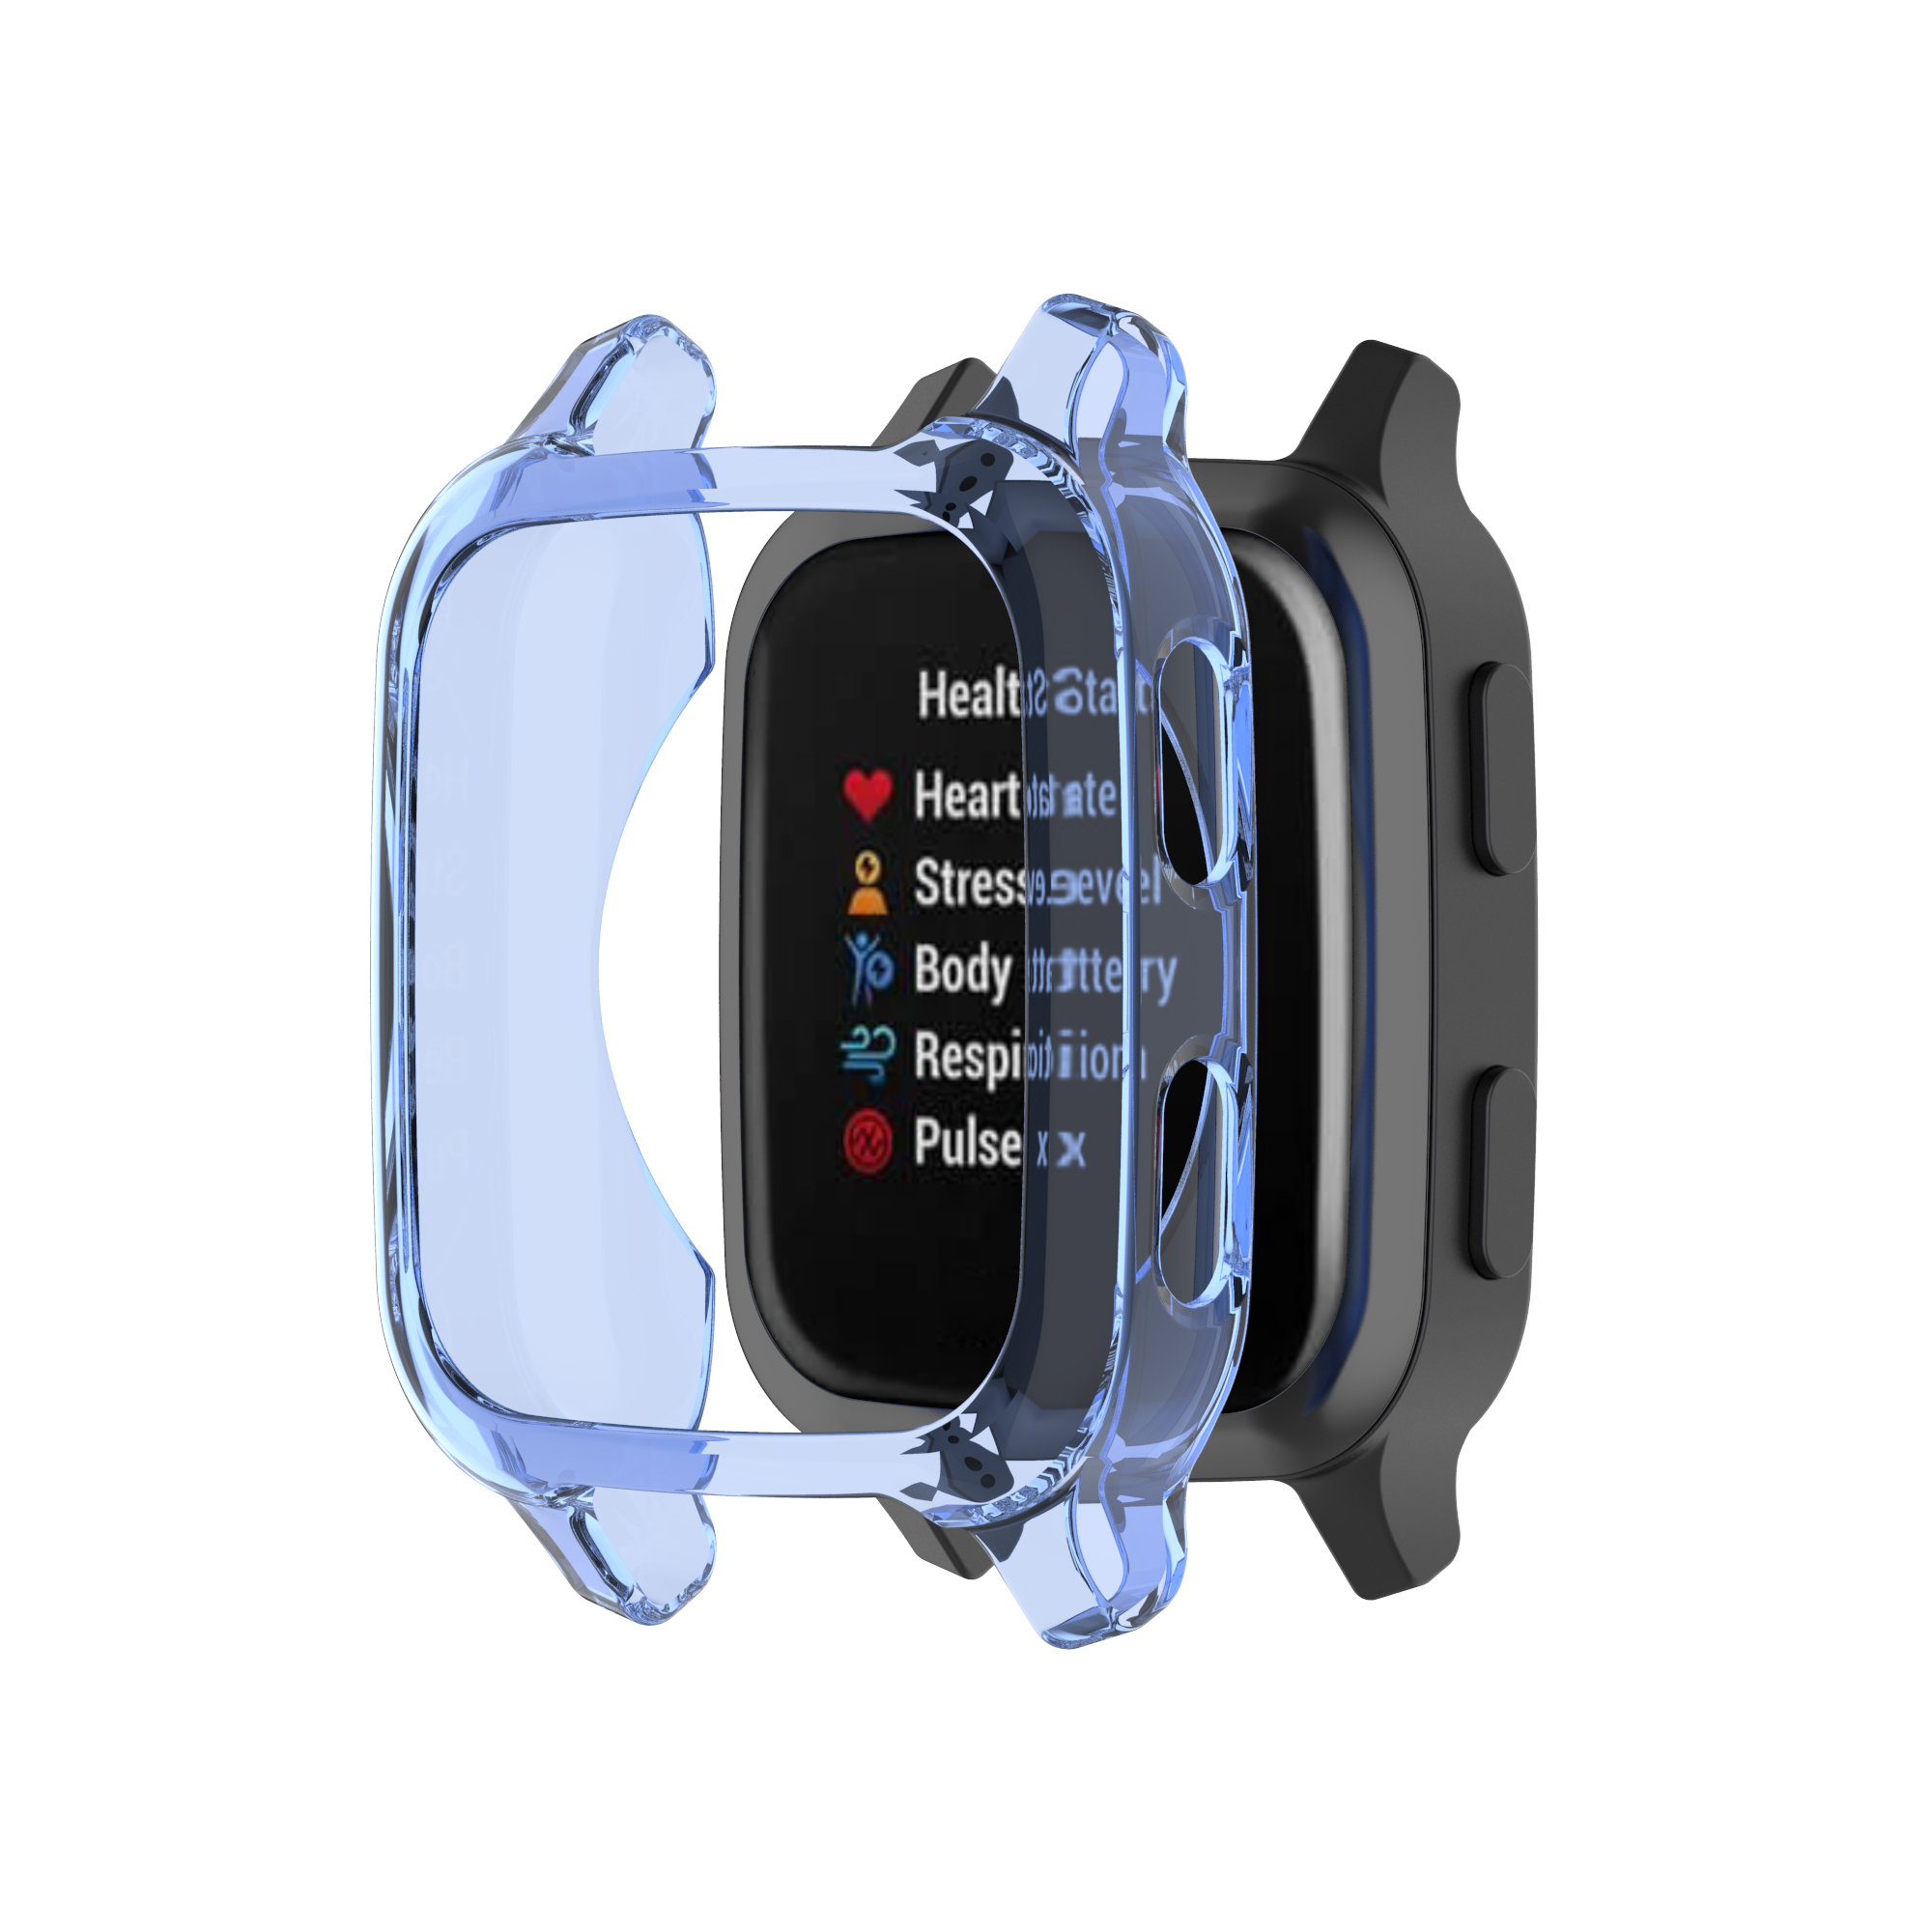 Bakeey-TPU-Transparent-Half-pack-Watch-Case-Cover-Watch-Shell-Protector-For-Garmin-Venu-sq-1791985-9